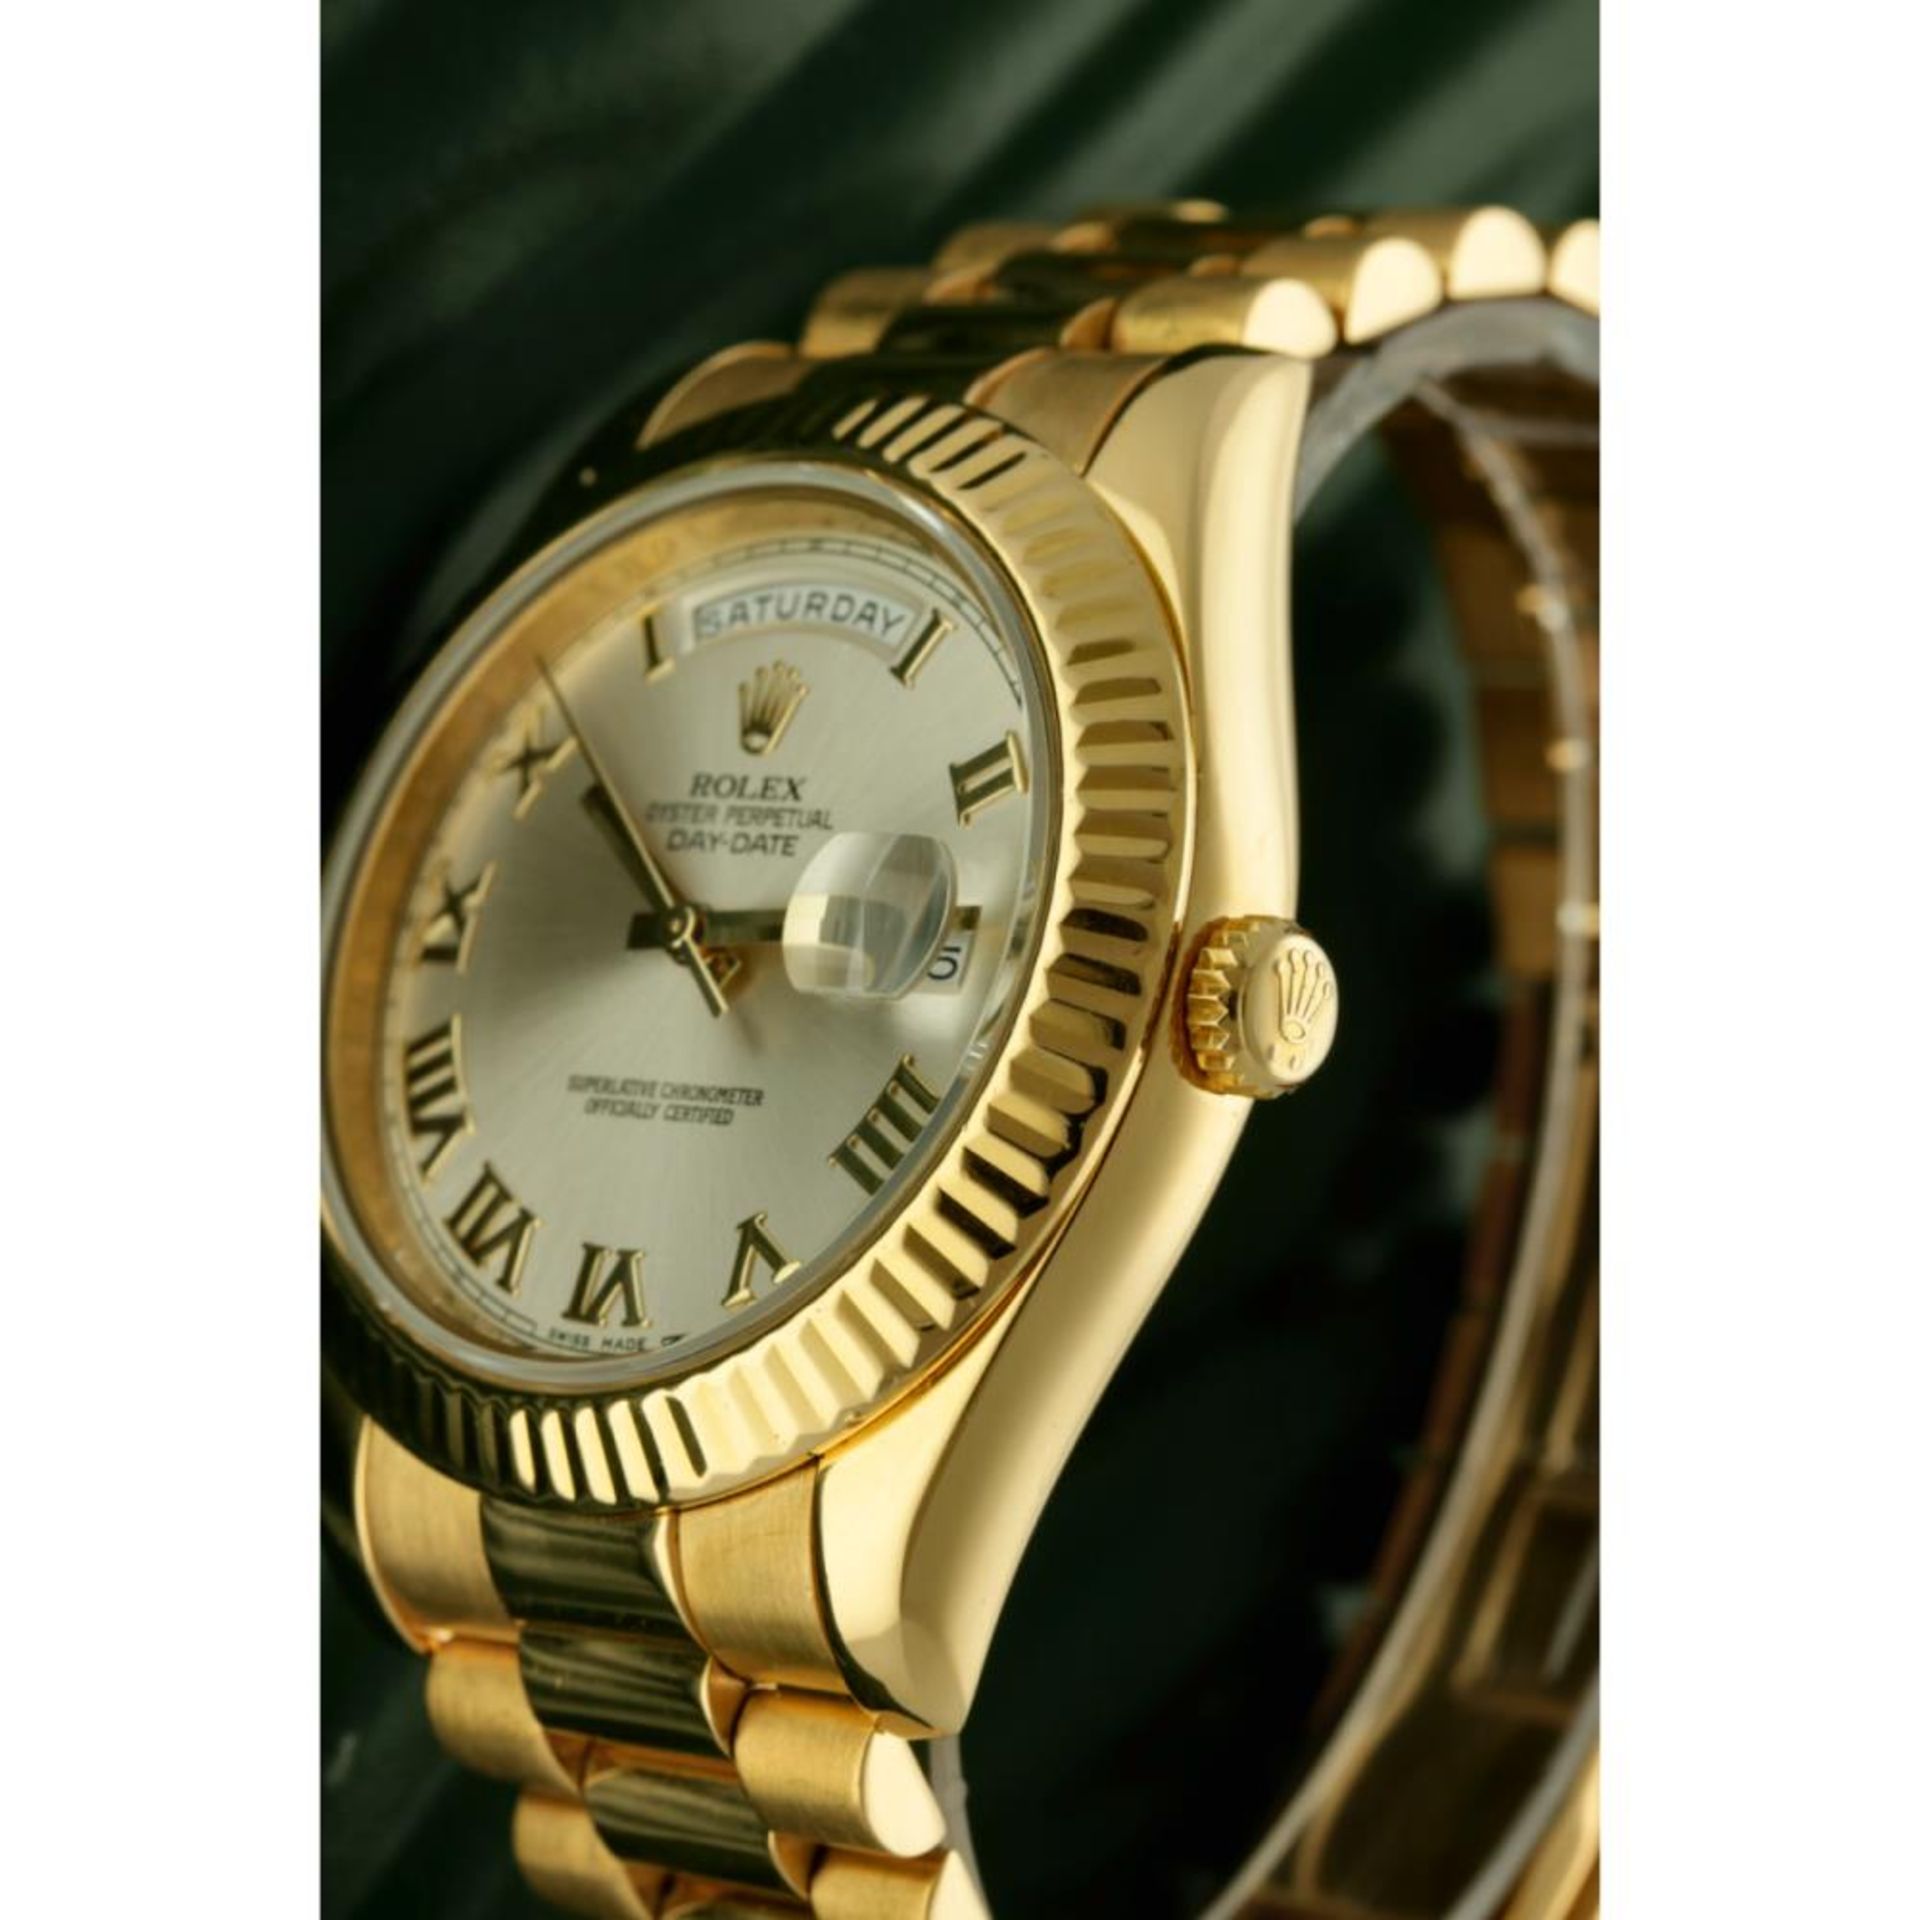 Rolex Day-Date 218238 - Men's watch - apprx. 2011. - Image 8 of 9